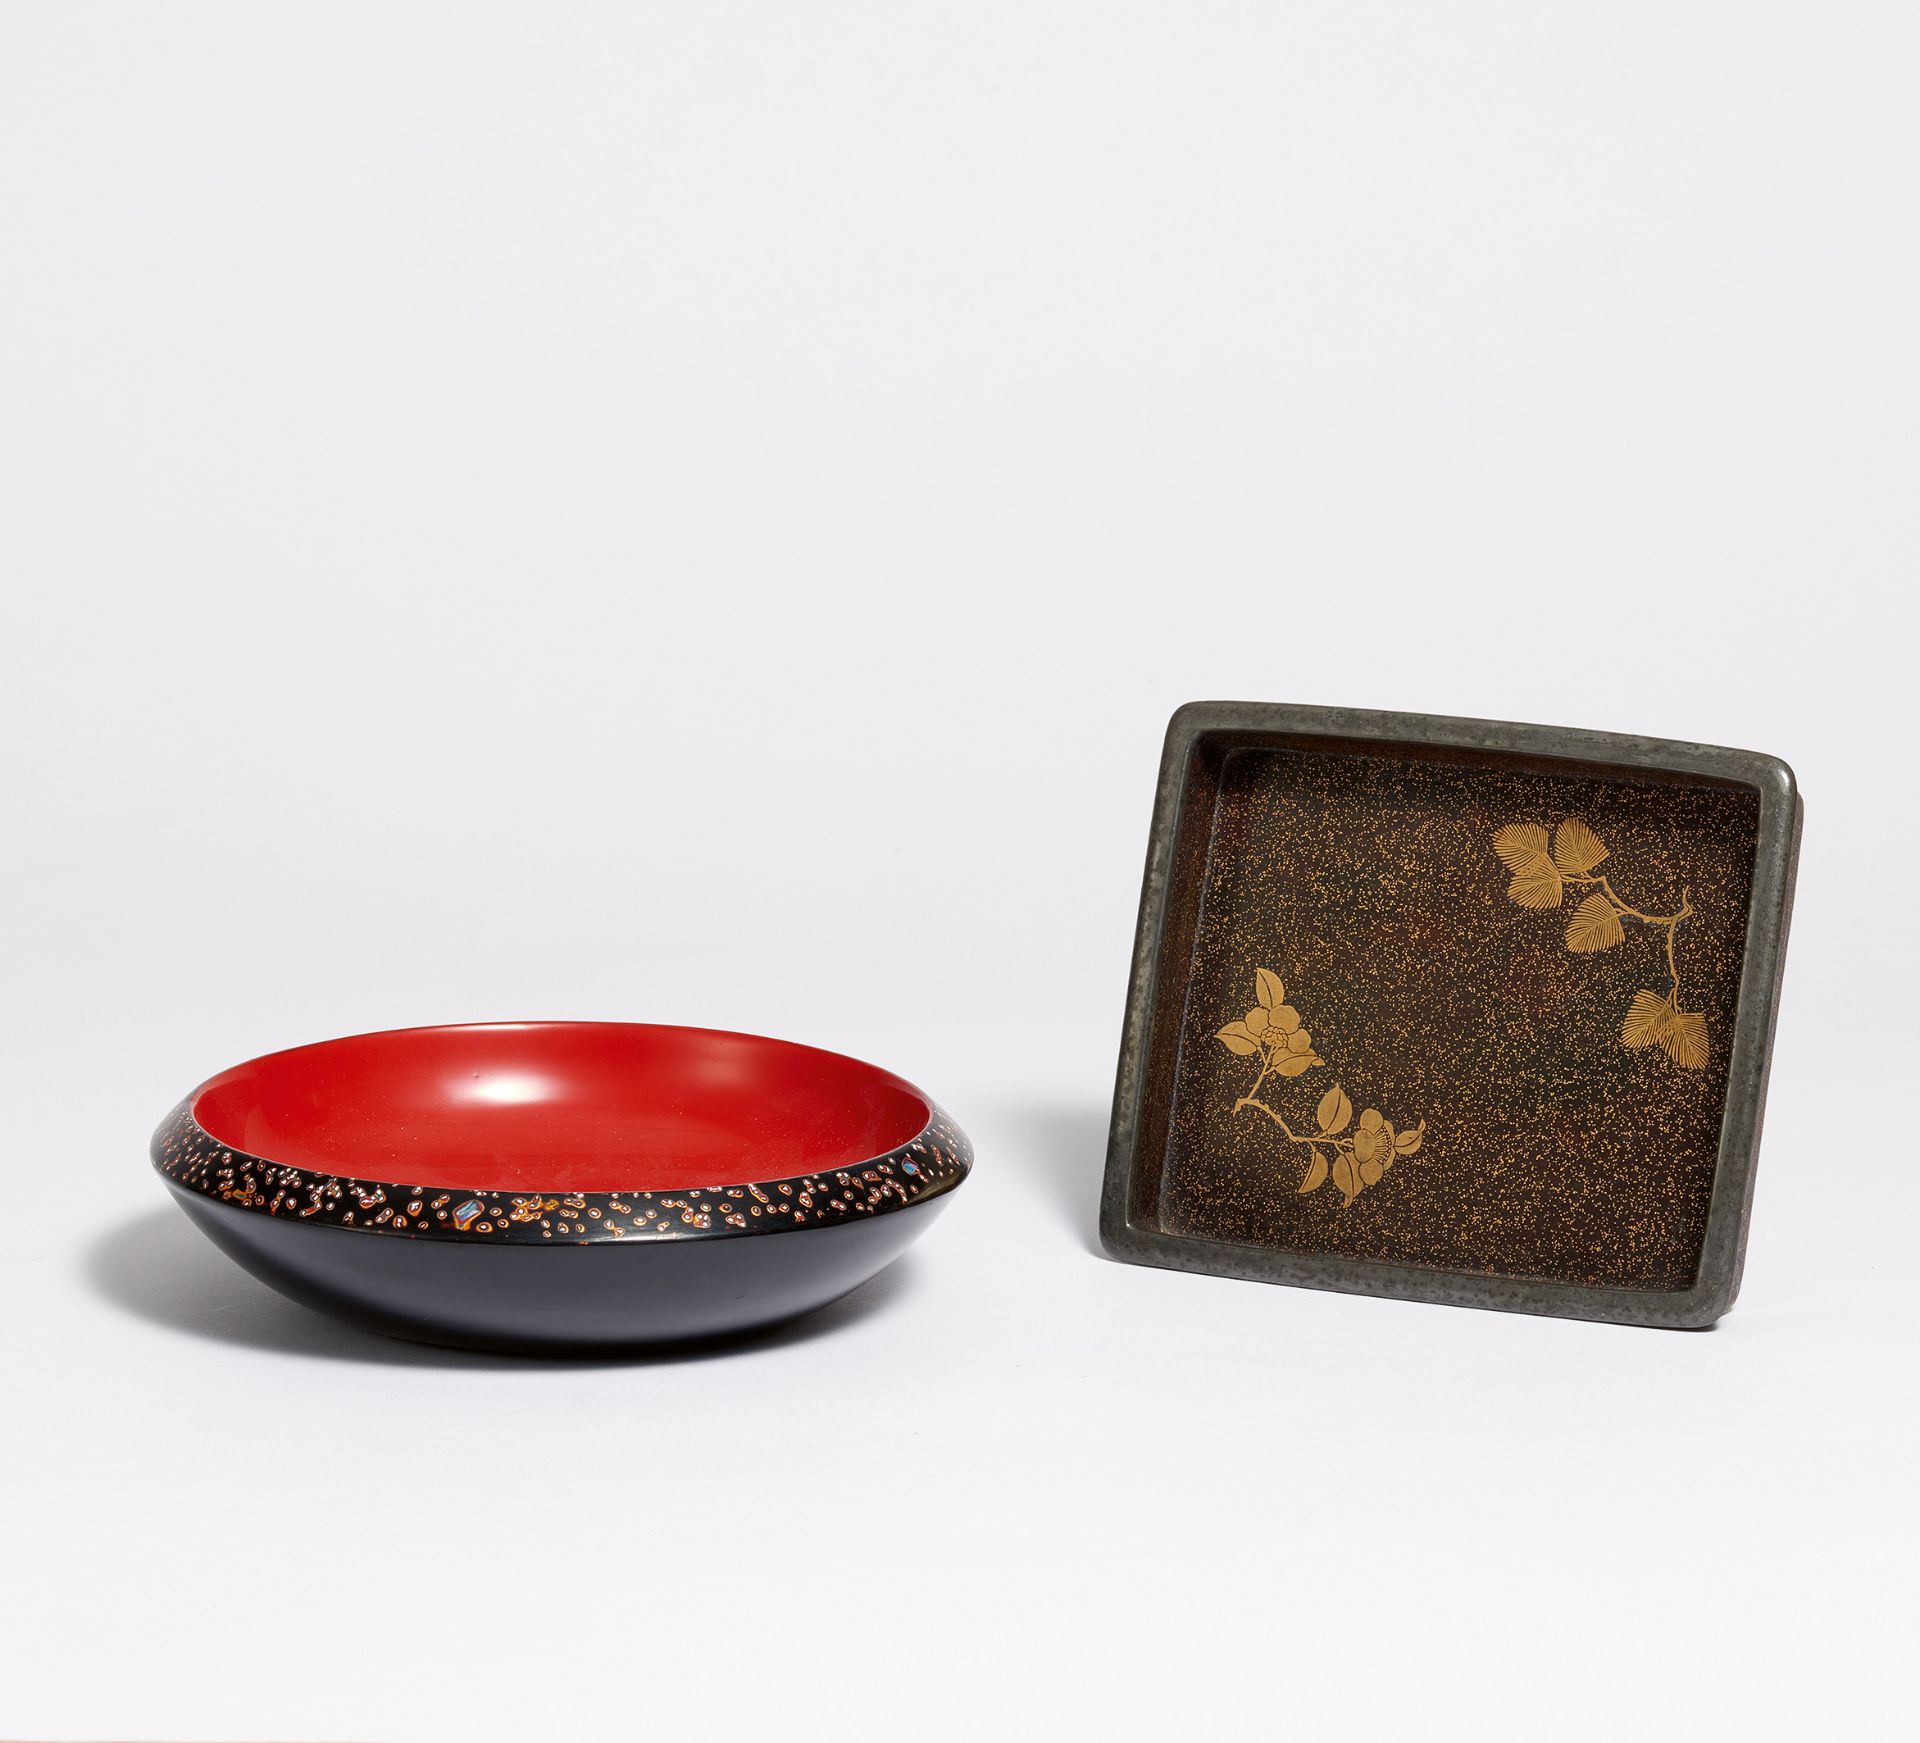 SMALL INSERT TRAY (BON) AND FLAT BOWL FOR SWEETS. Japan. Edo period (1603-1868) and later. a)